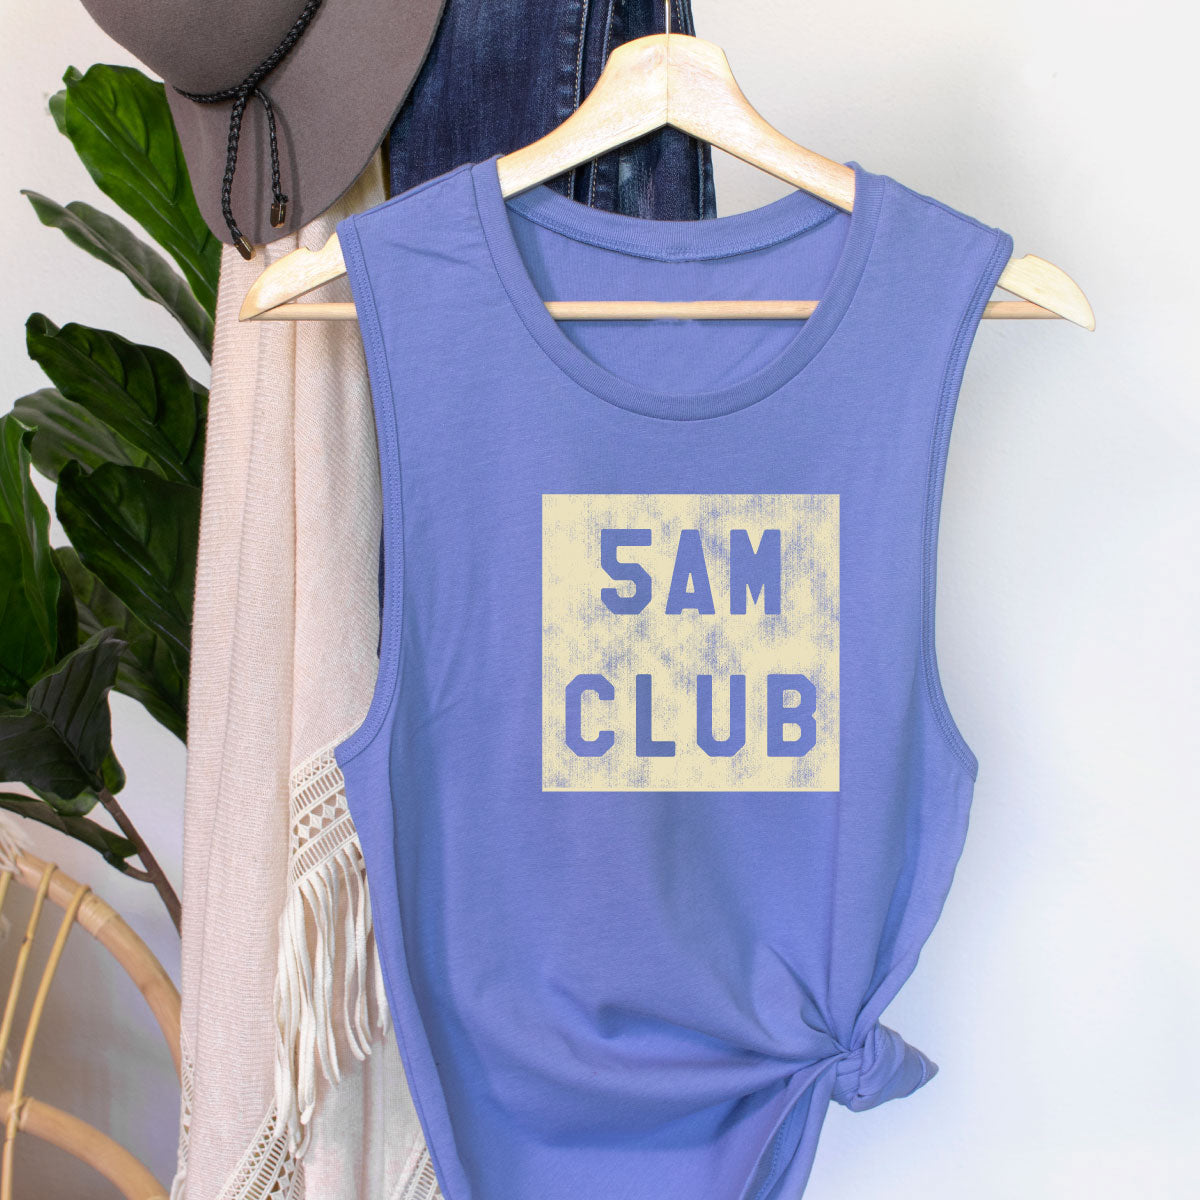 5am Club Women’s Fitted V.I.T.™ Festival Tank